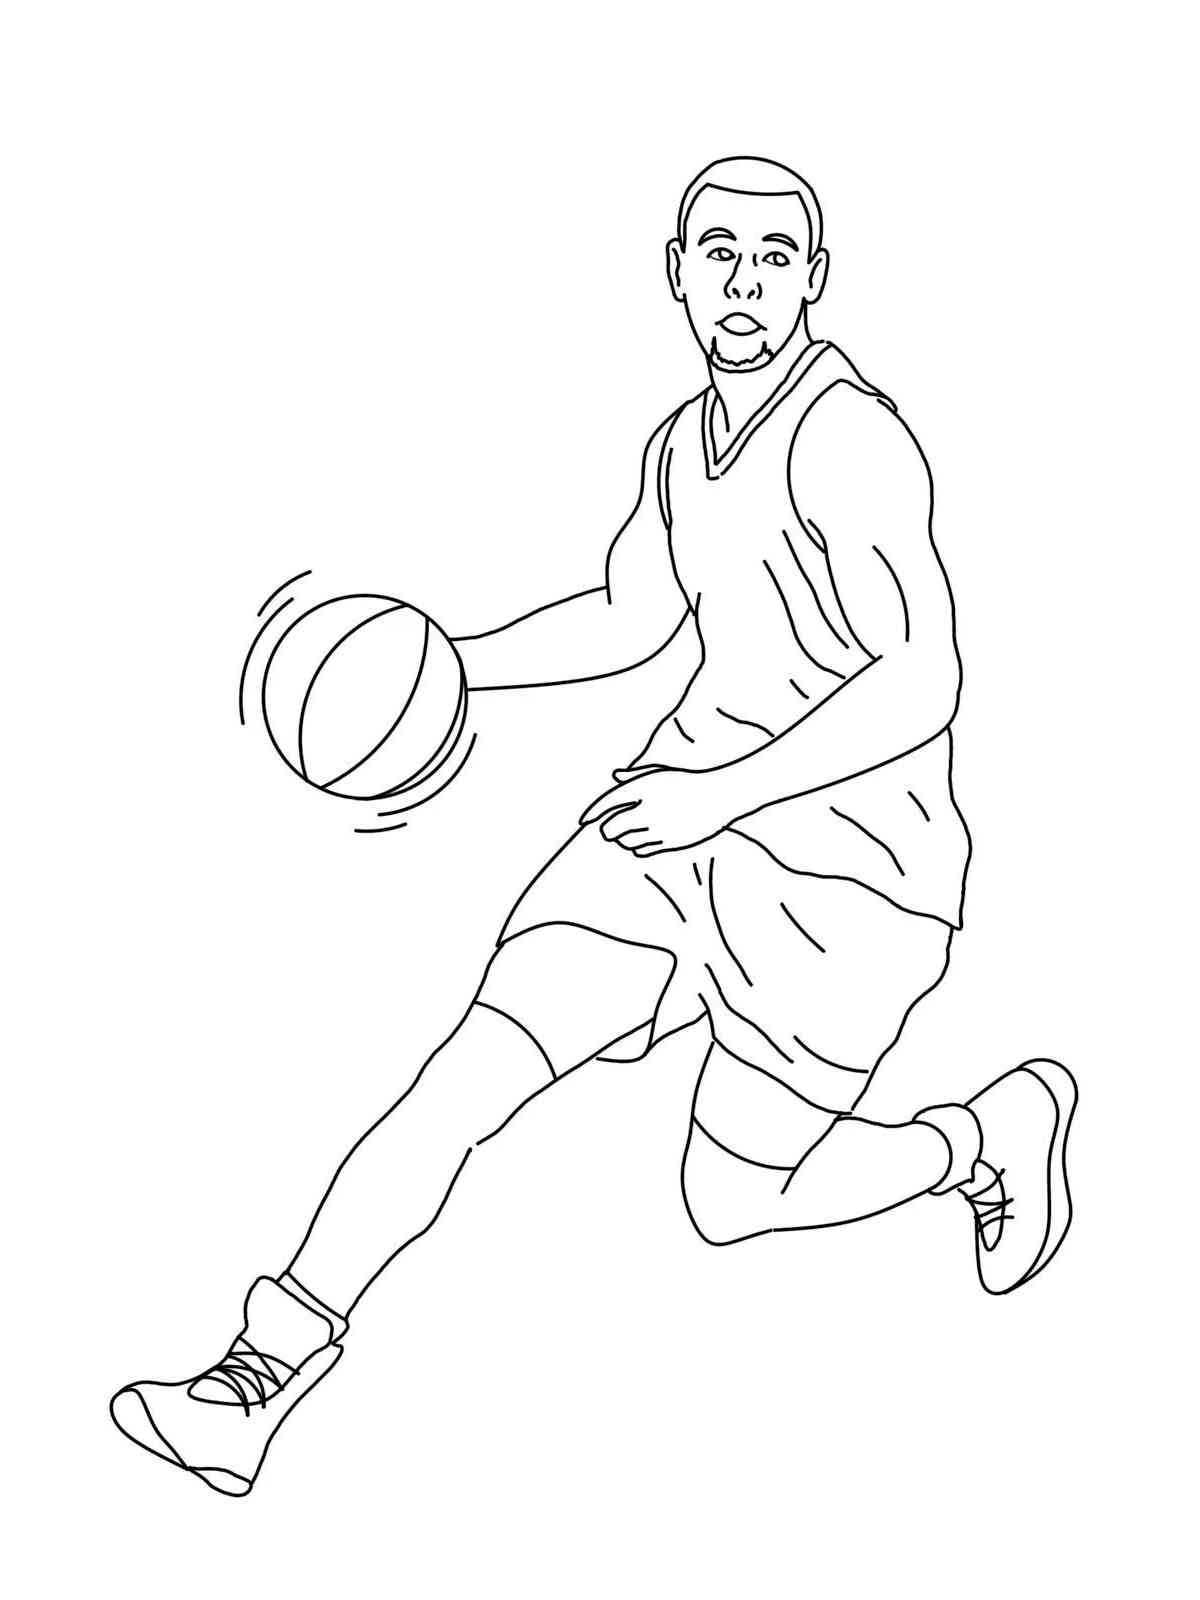 Stephen Curry coloring pages